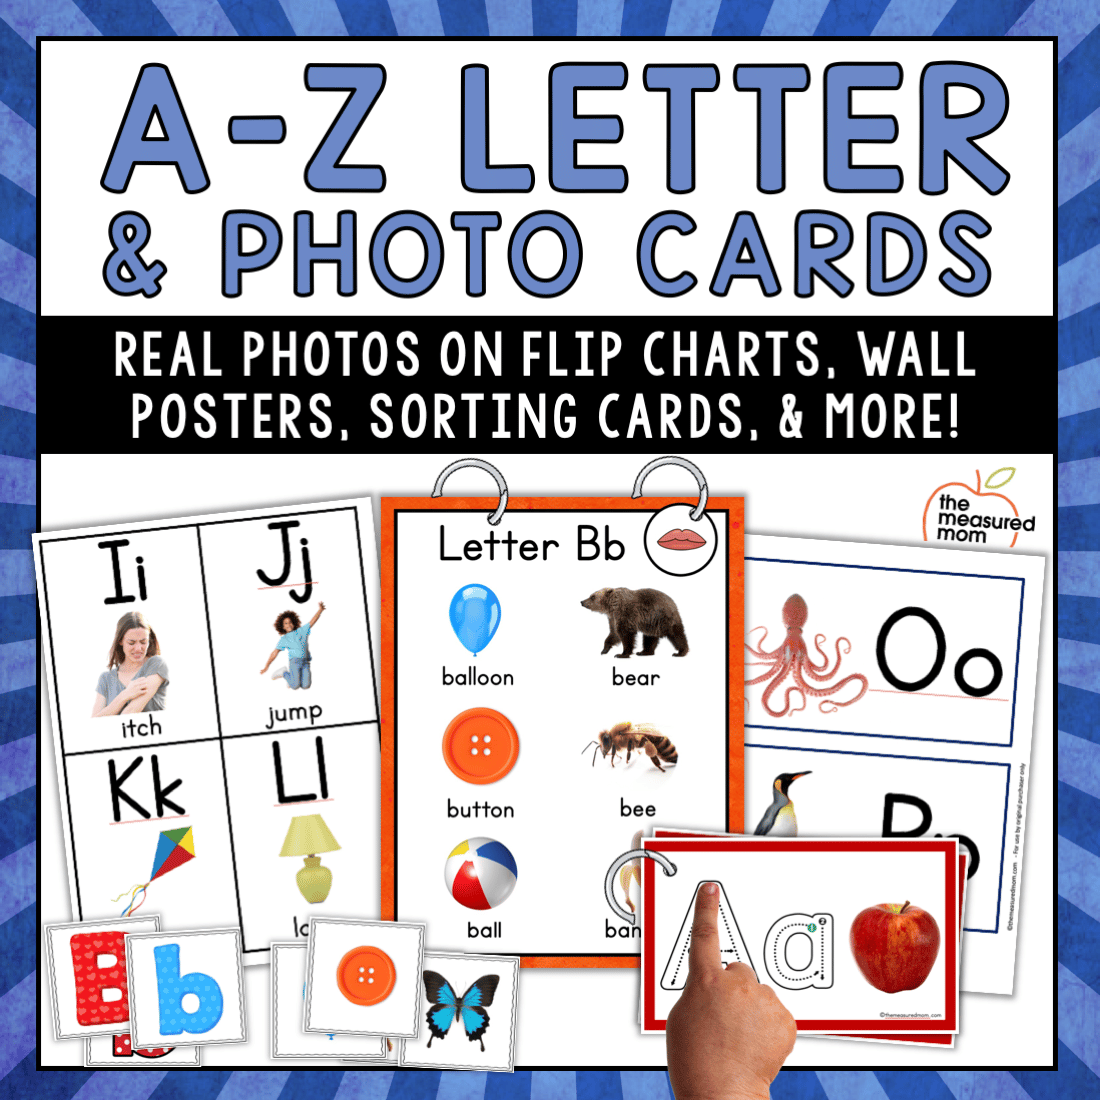 FREE Alphabet Flashcards and Printables for Wall